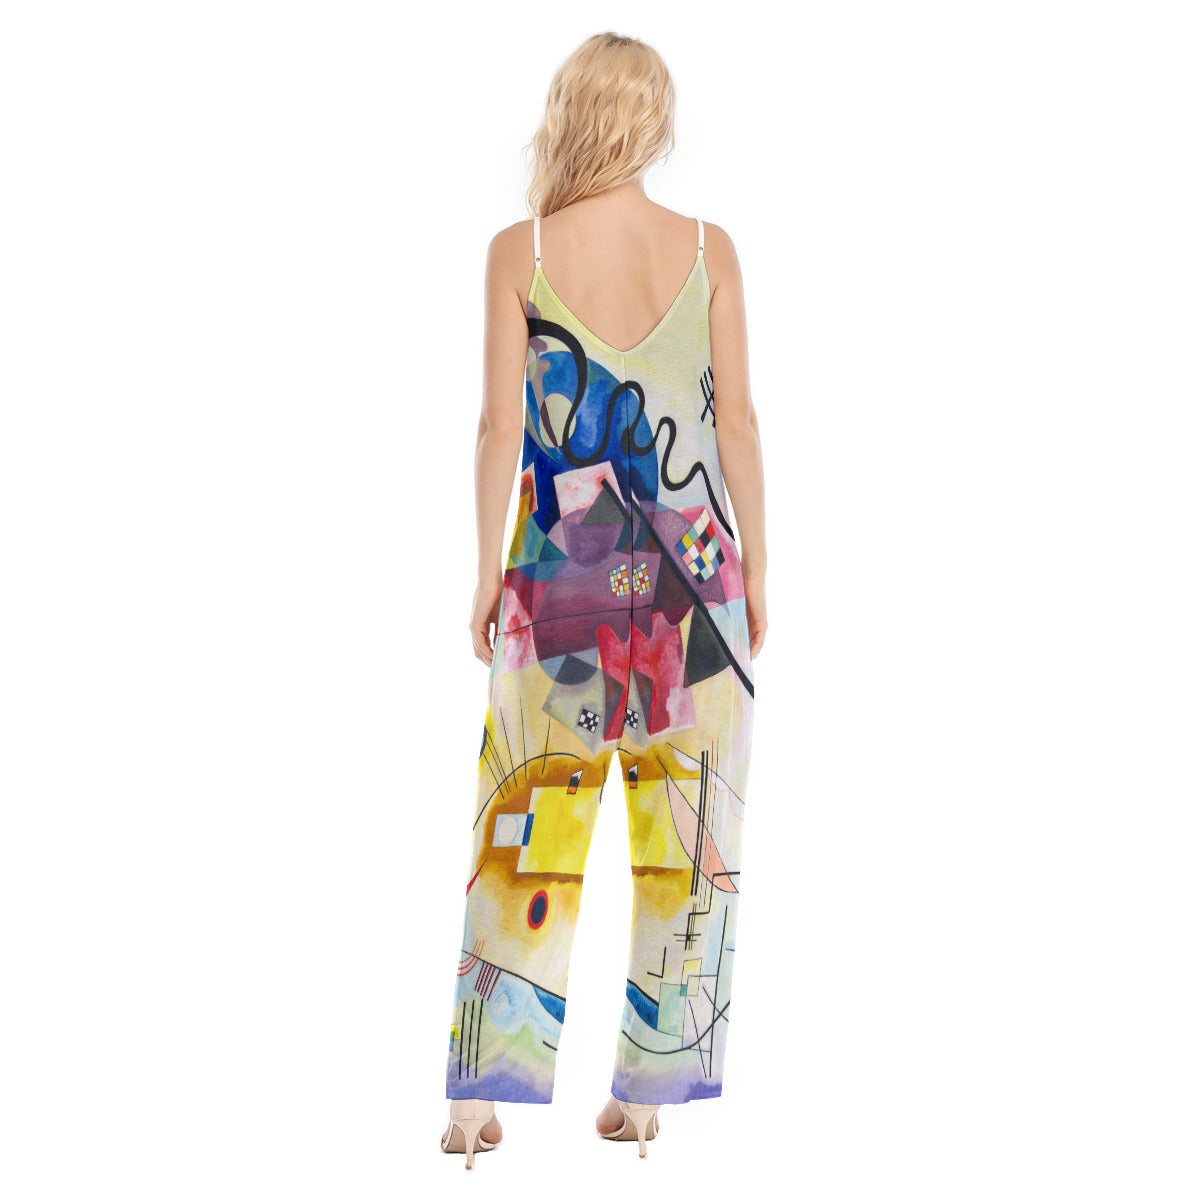 Women's loose cami jumpsuit in abstract design